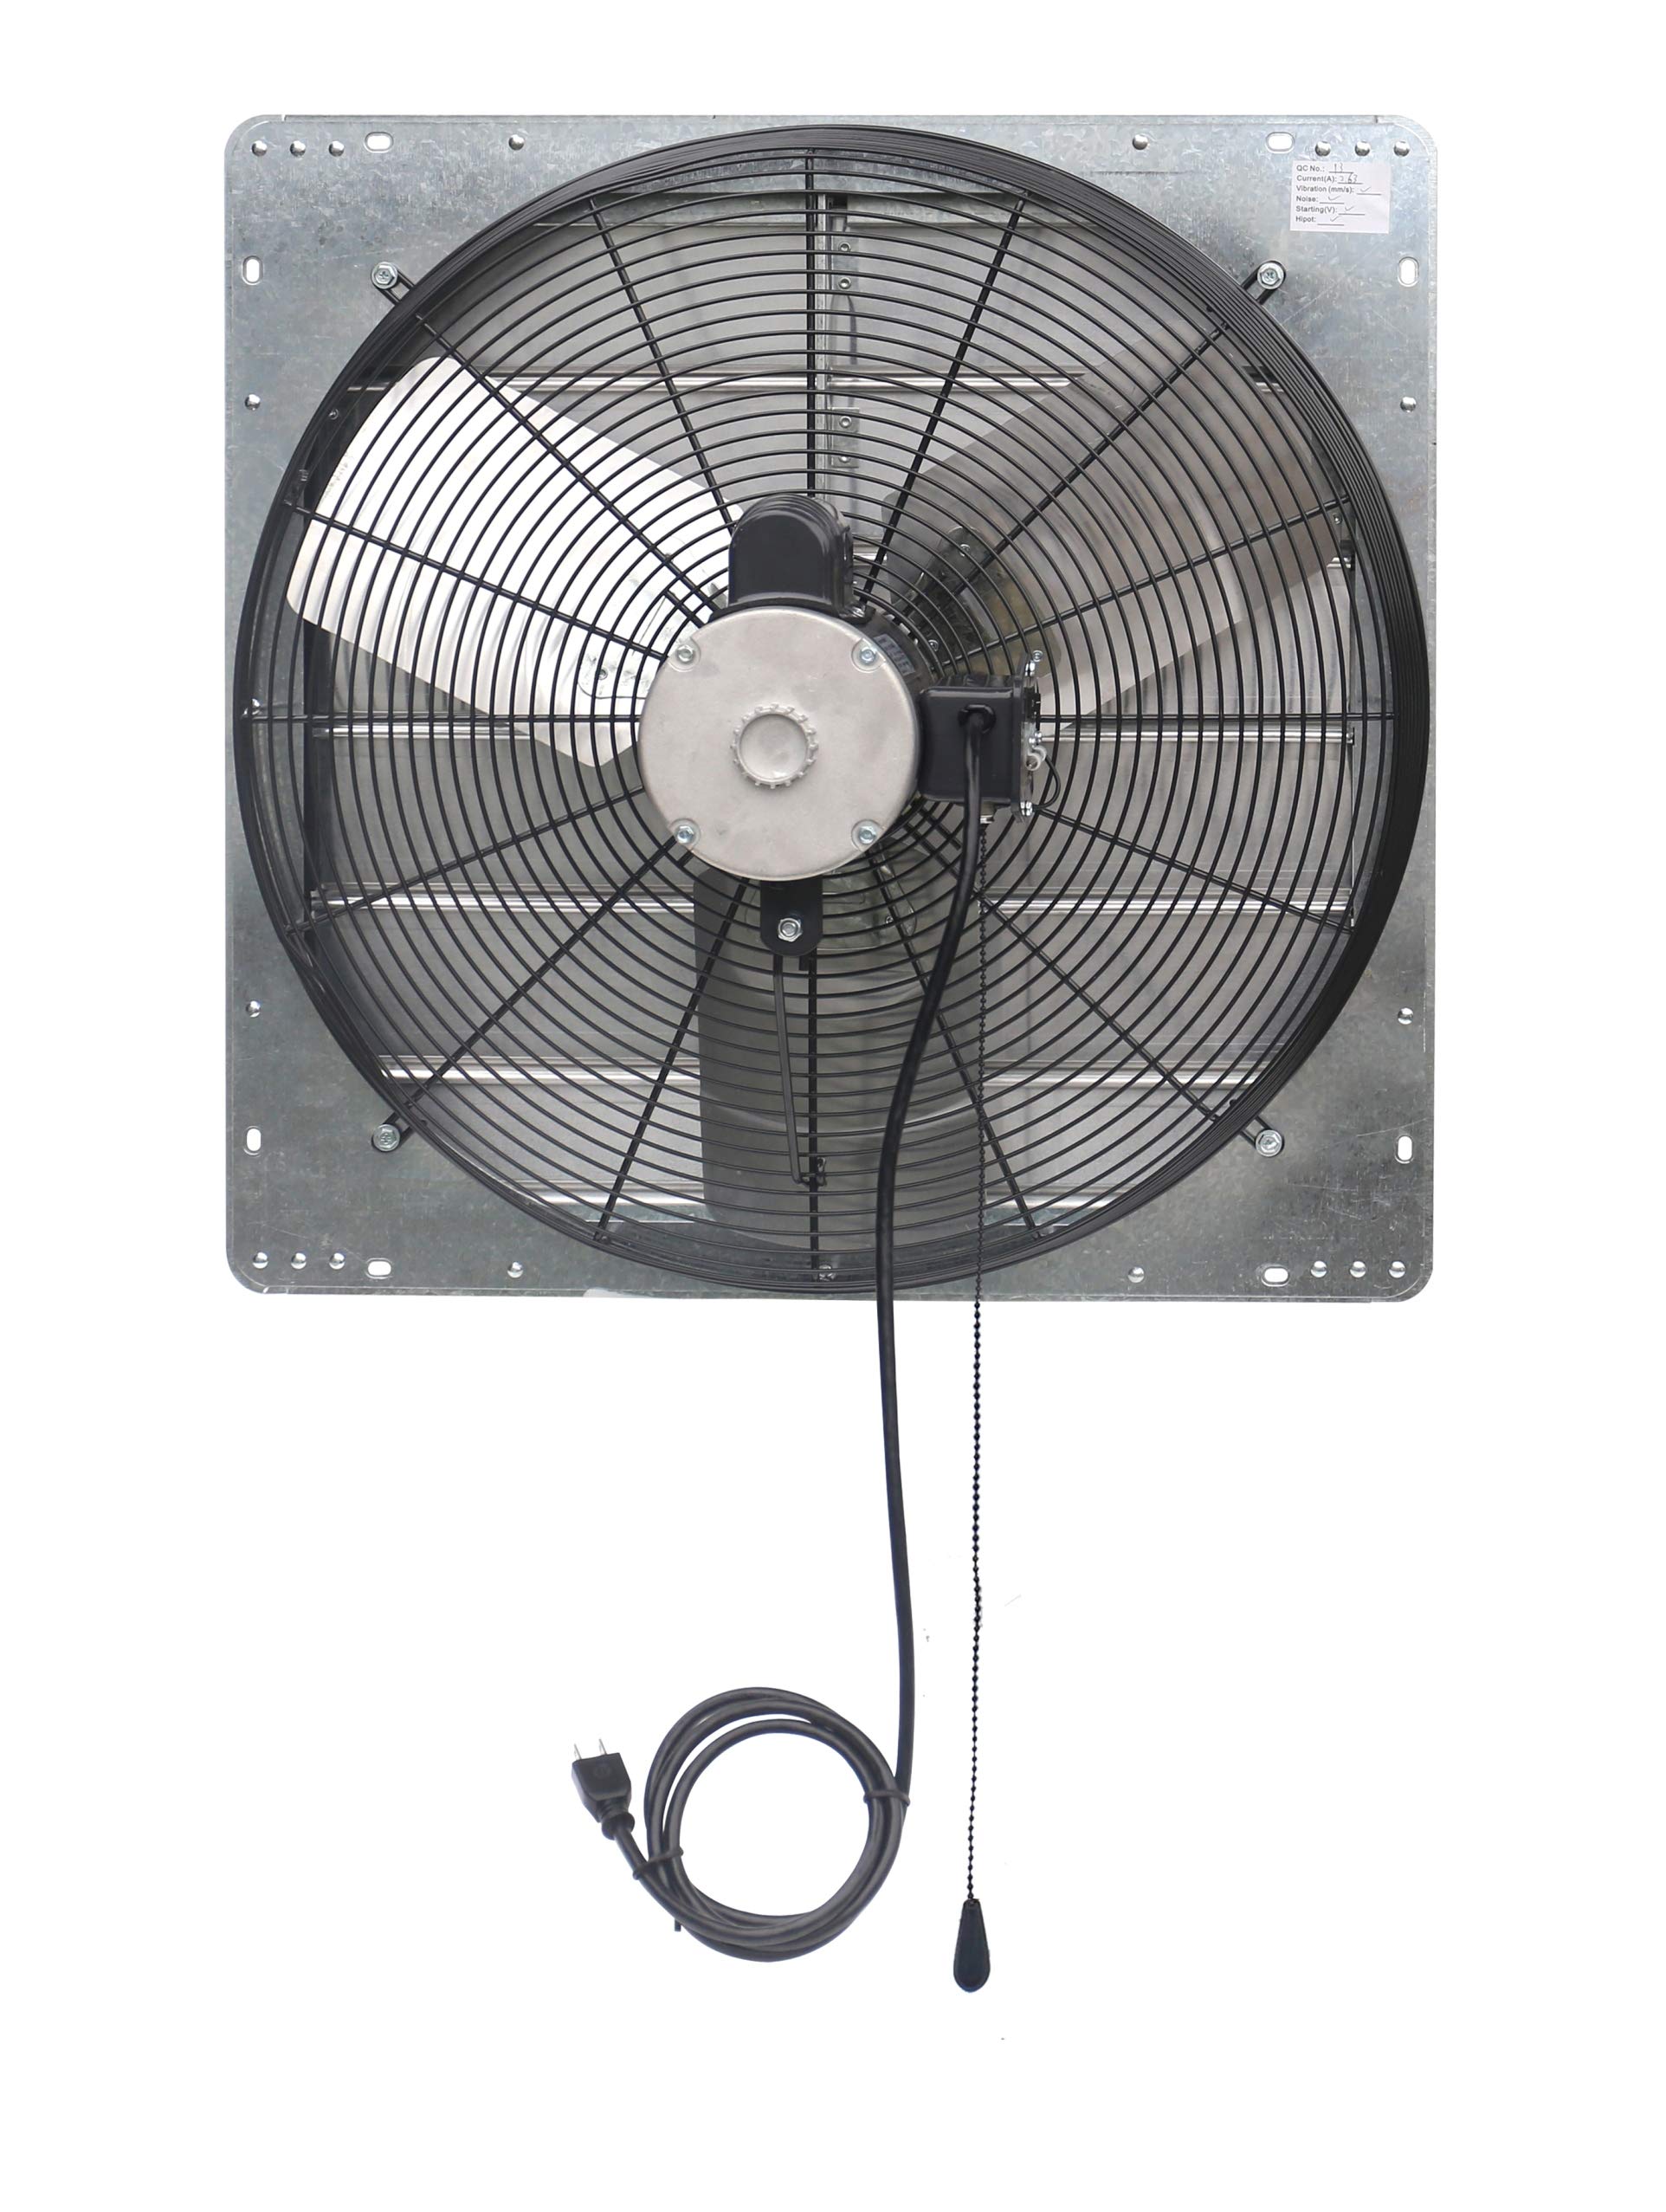 iLIVING ILG8SF24V-T 24 inch Shutter Exhaust Attic Garage Grow, Ventilation Fan with 2 Speed Thermostat 6 Foot Long 3 Plugs Cord, 24